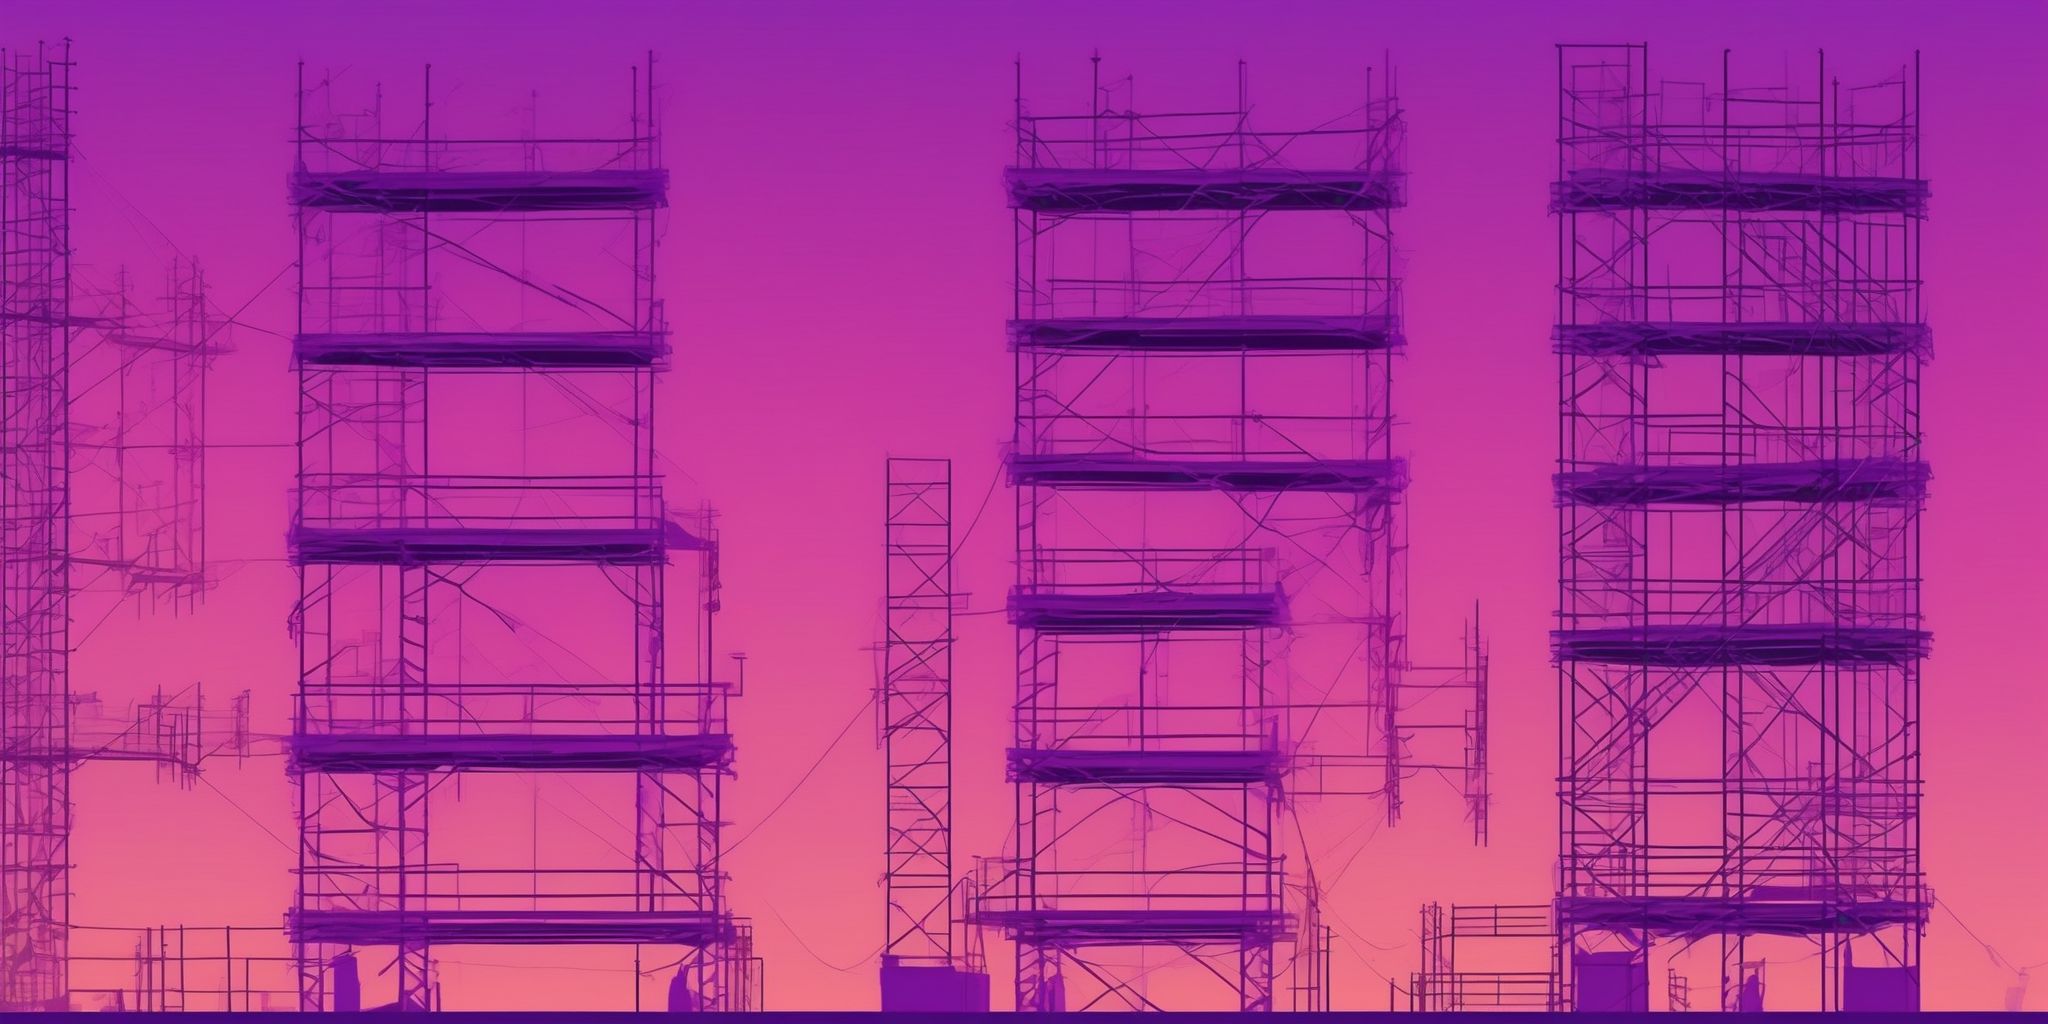 Scaffold in flat illustration style, colorful purple gradient colors